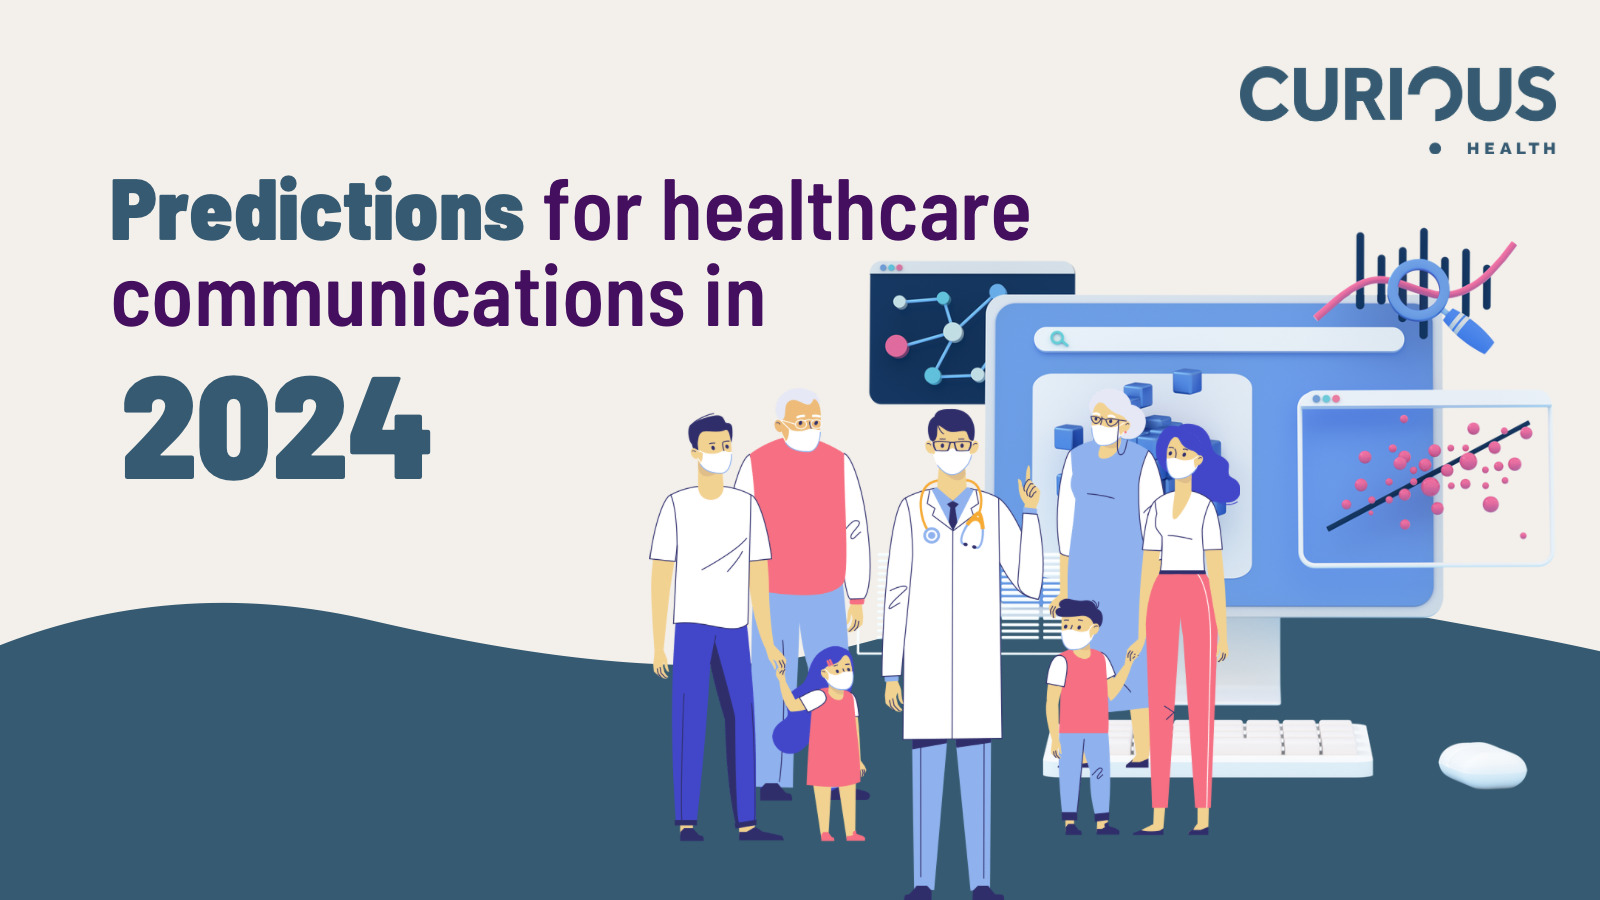 Predictions for healthcare communications in 2024